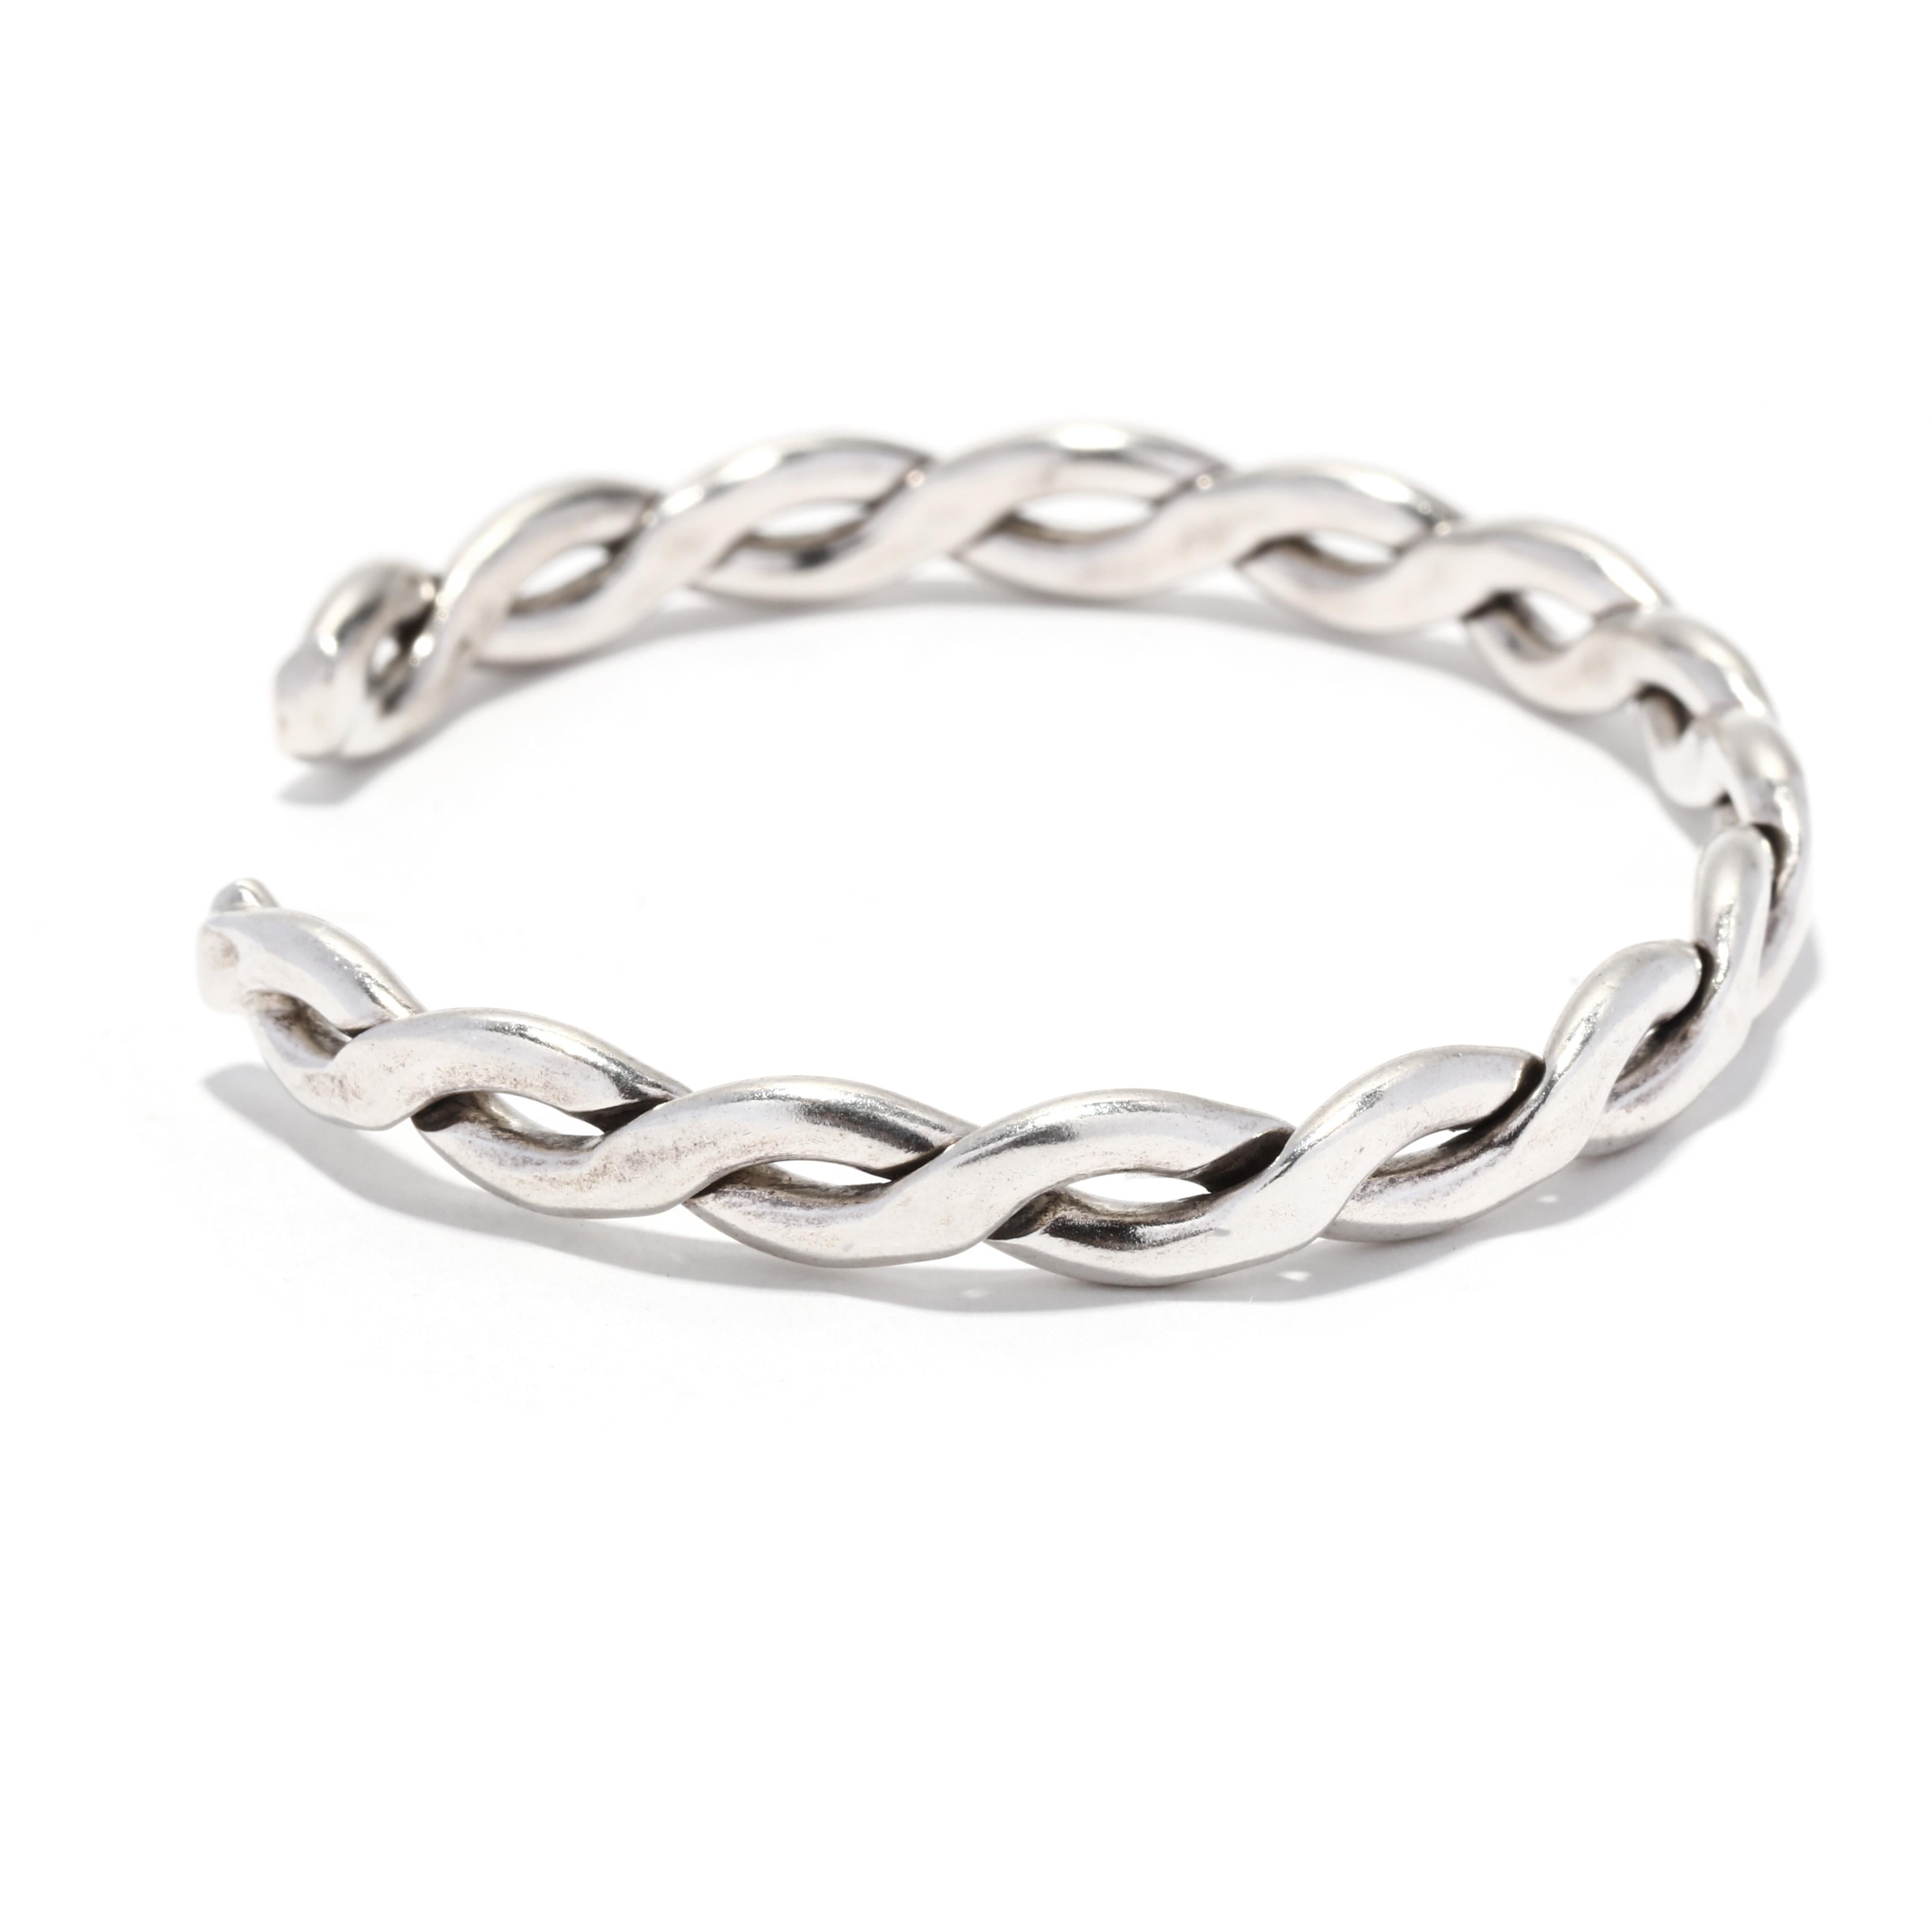 A vintage Mexican sterling silver braided cuff bracelet. This thin cuff bracelet features a flat braided motif.  It is stamped 925 Mexico.  

Interior circumference: 6.5 inches with a 7/8 inch opening

Width: 1/4 in.

Weight: 11.4 dwt. / 17.73